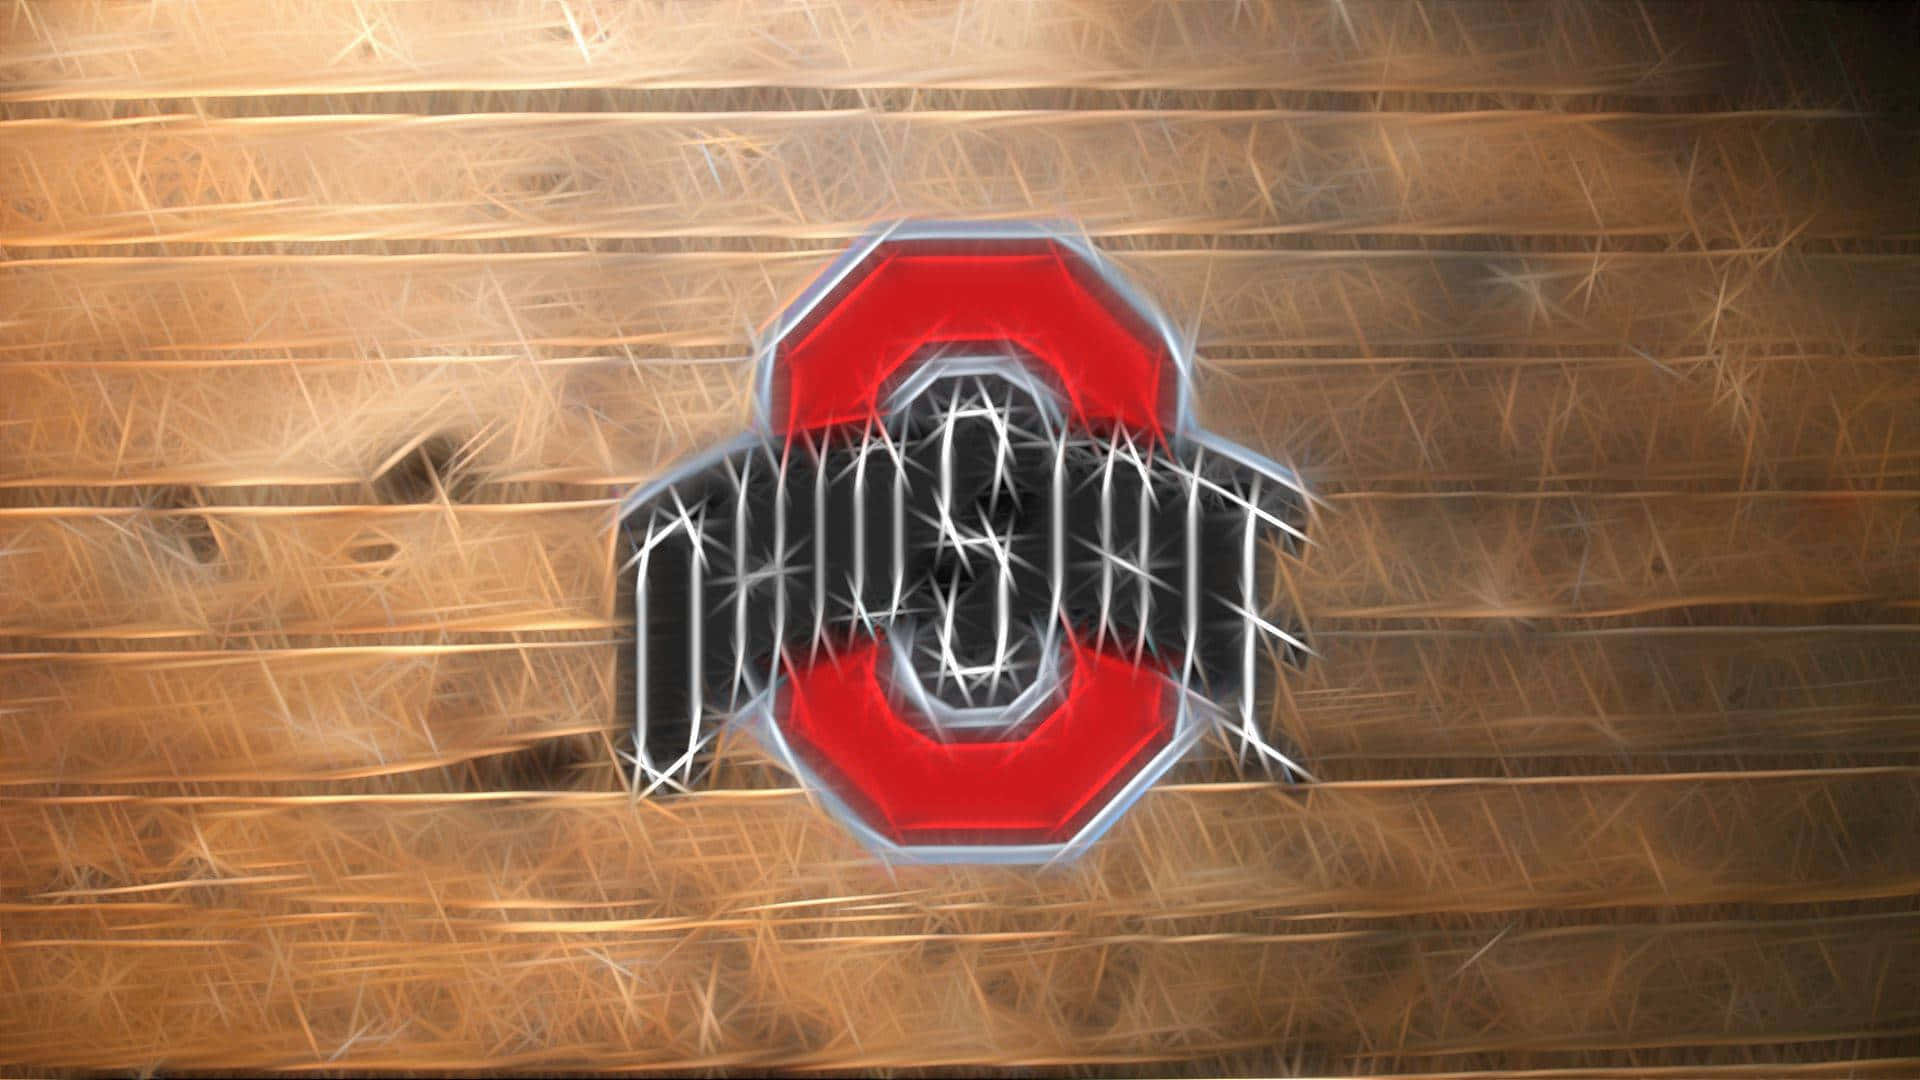 Show your team spirit with this stunningly cool Ohio State wall art Wallpaper